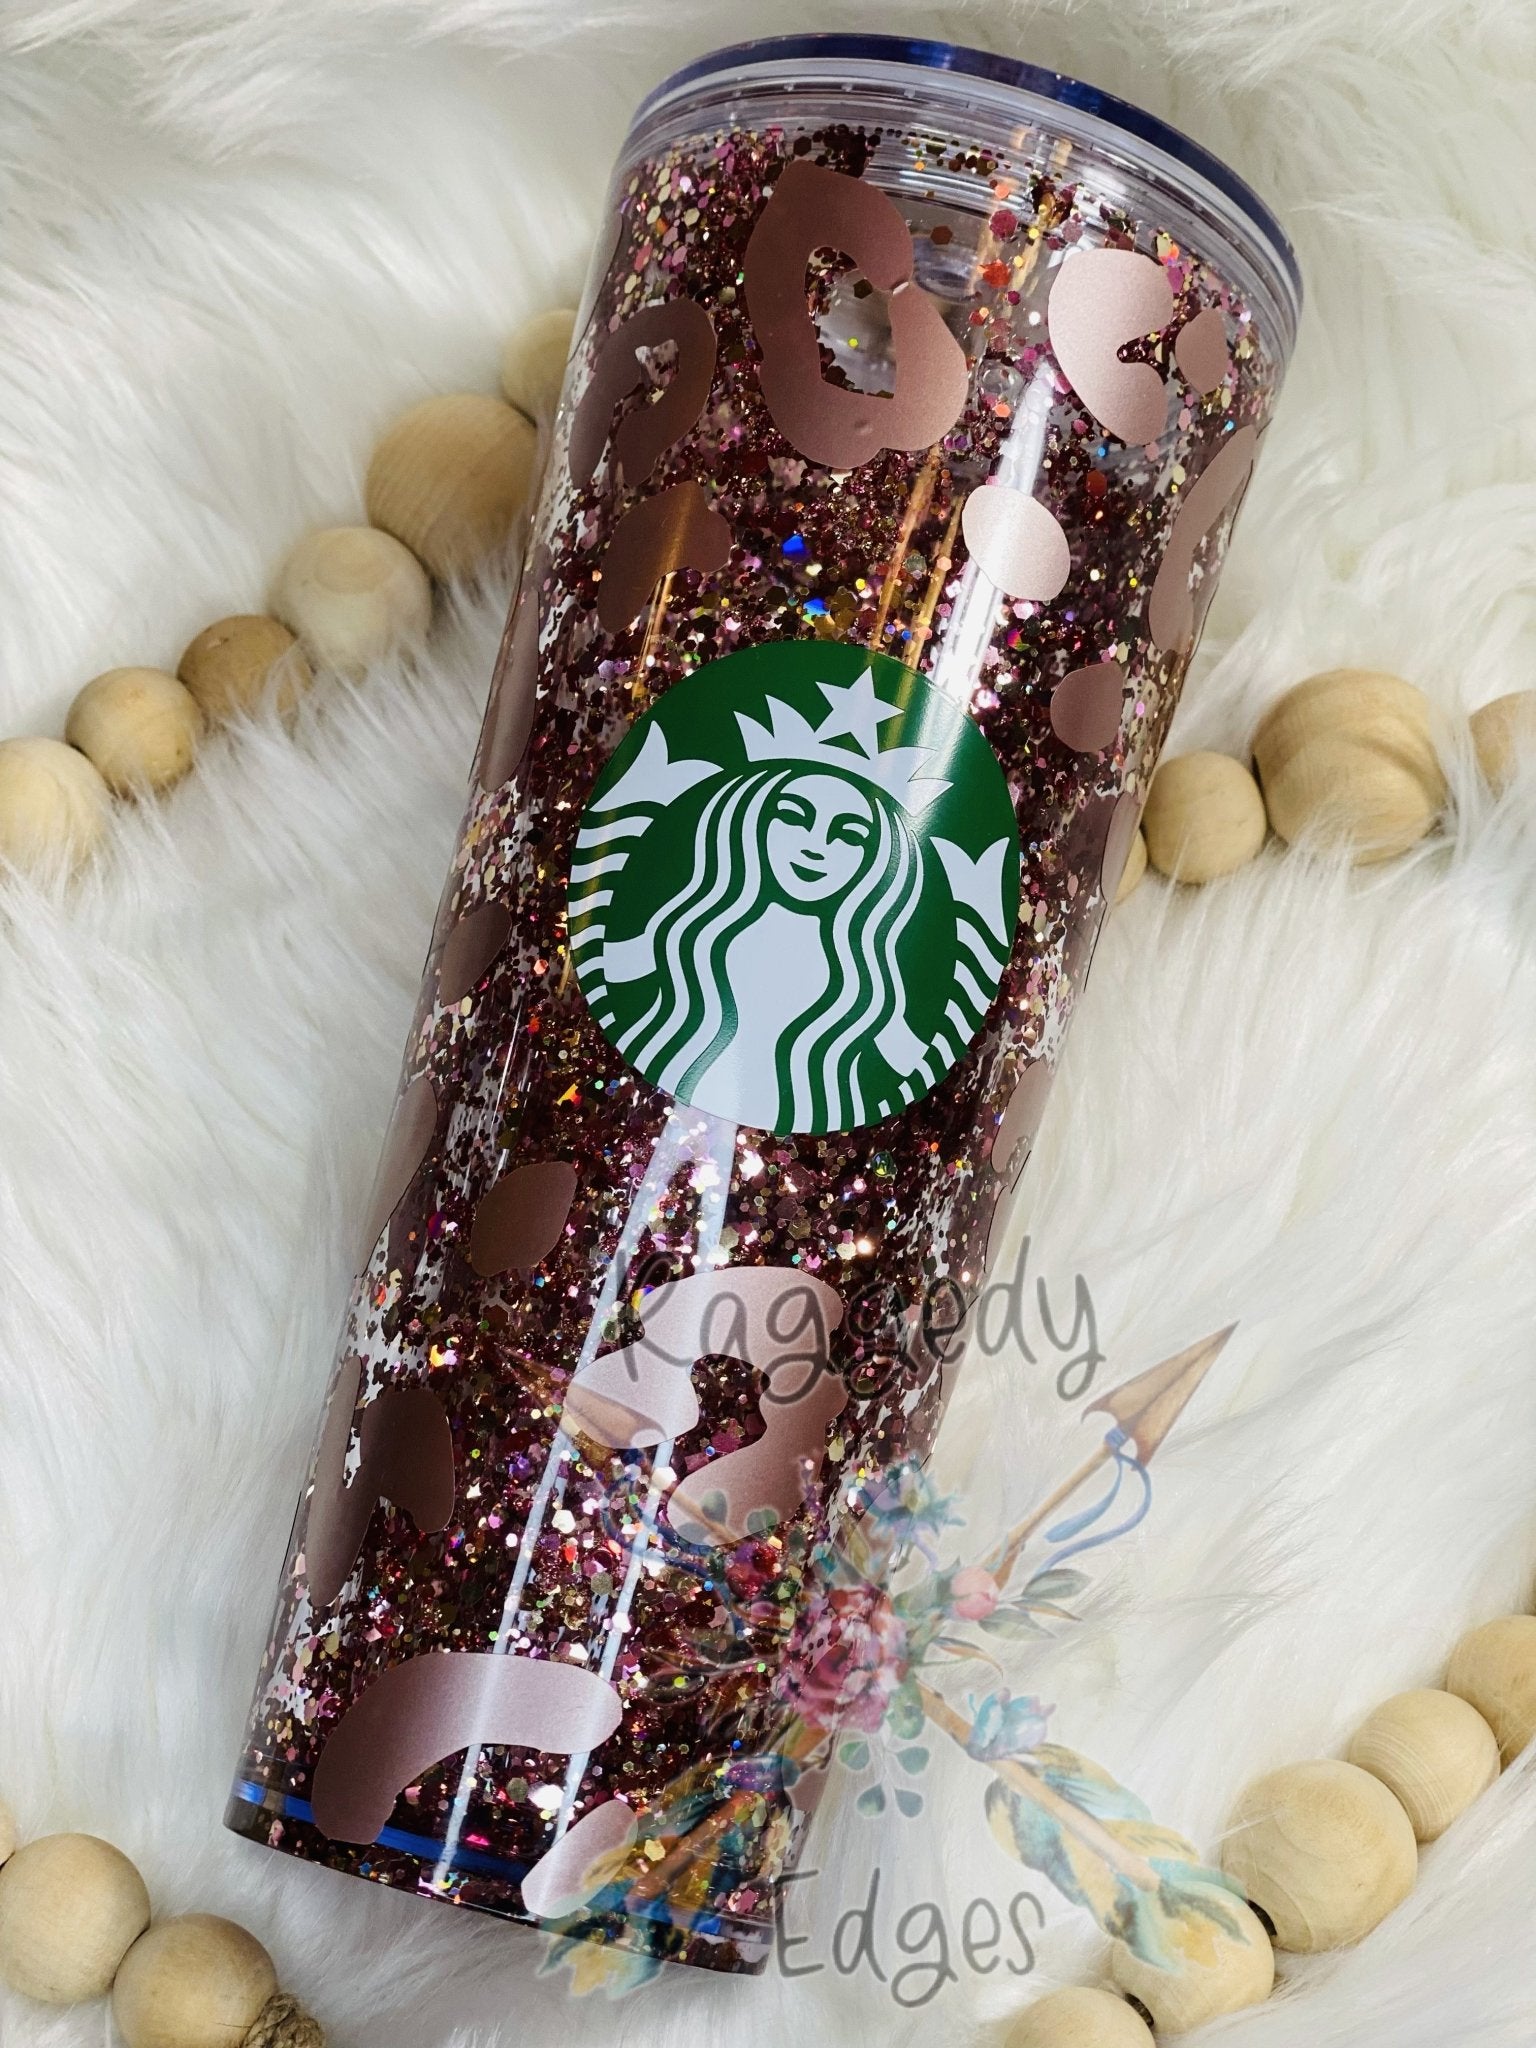 Starbucks Just Dropped Tons of Glittery Holiday Tumblers